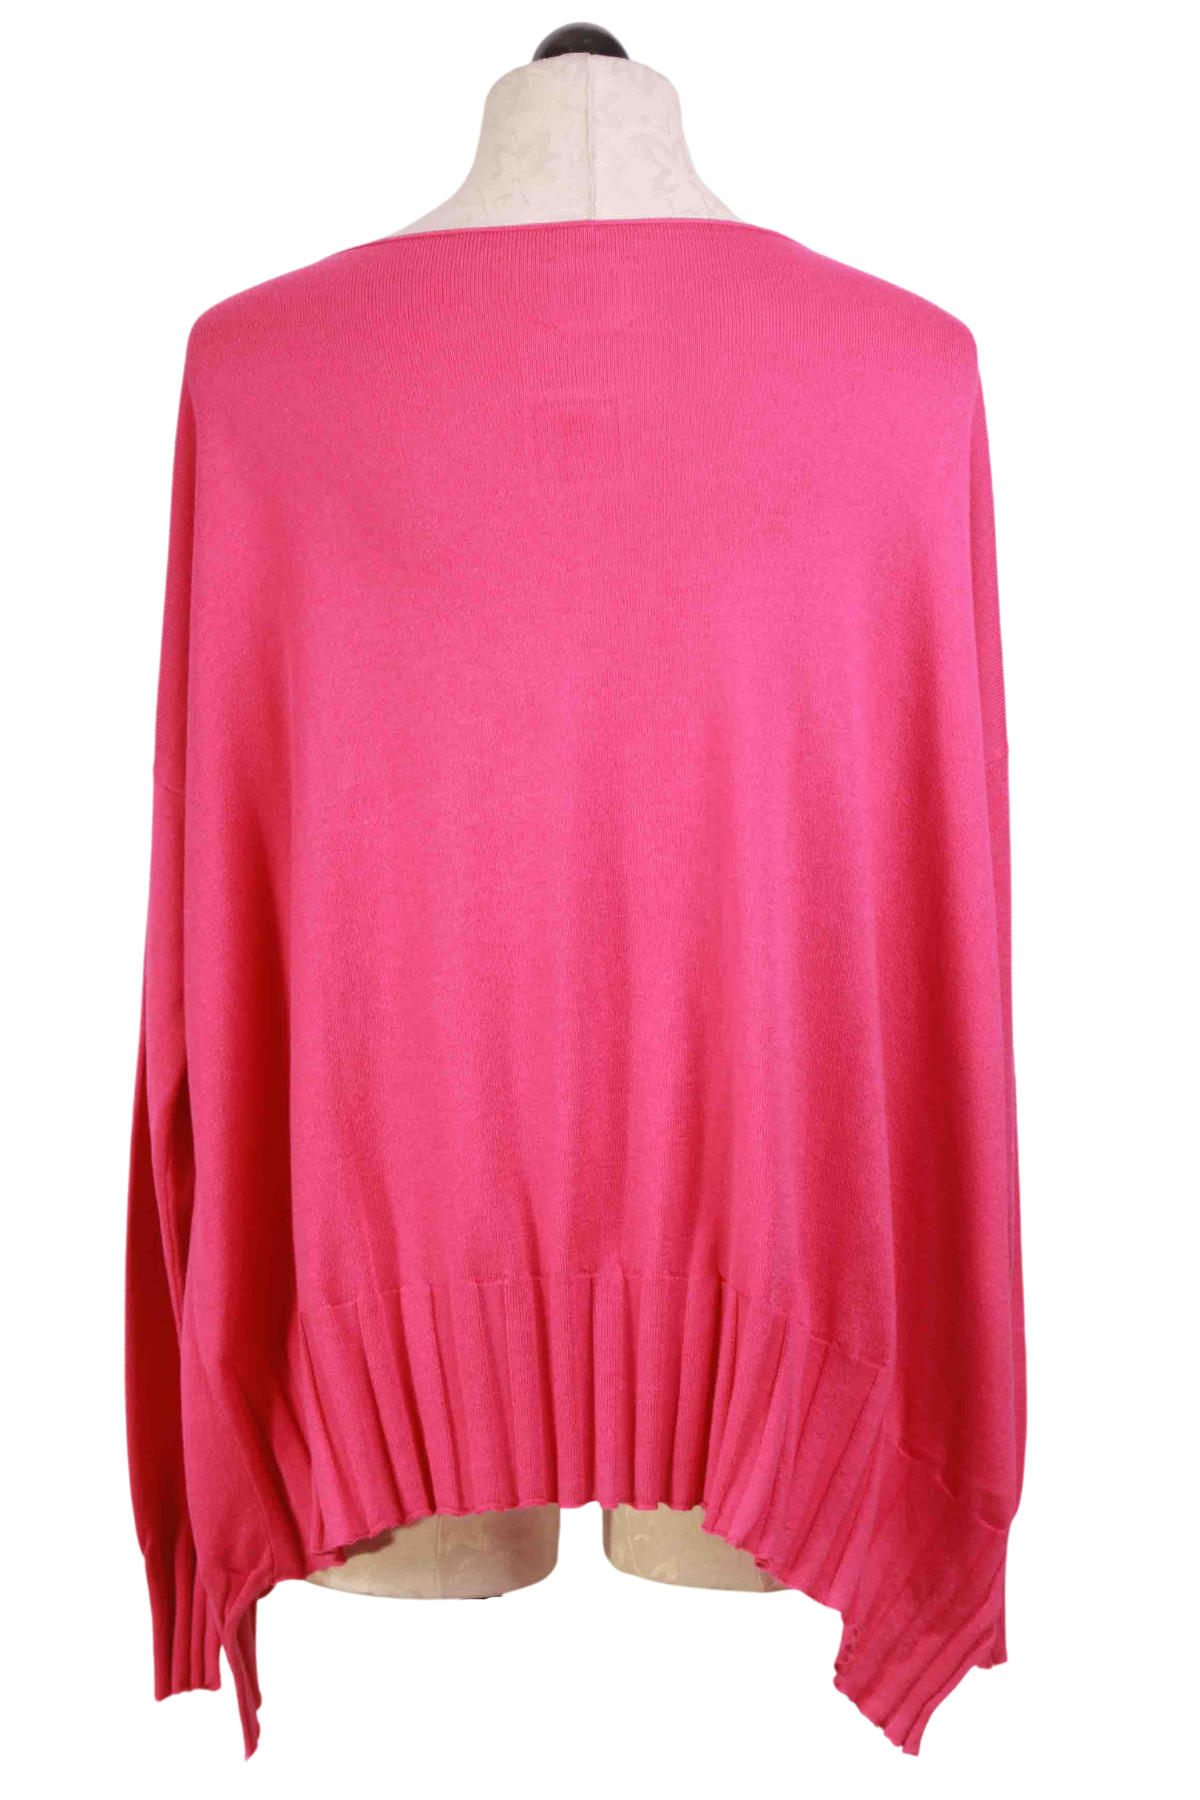 back view Lipstick colored Ribbed Boatneck Top by Planet